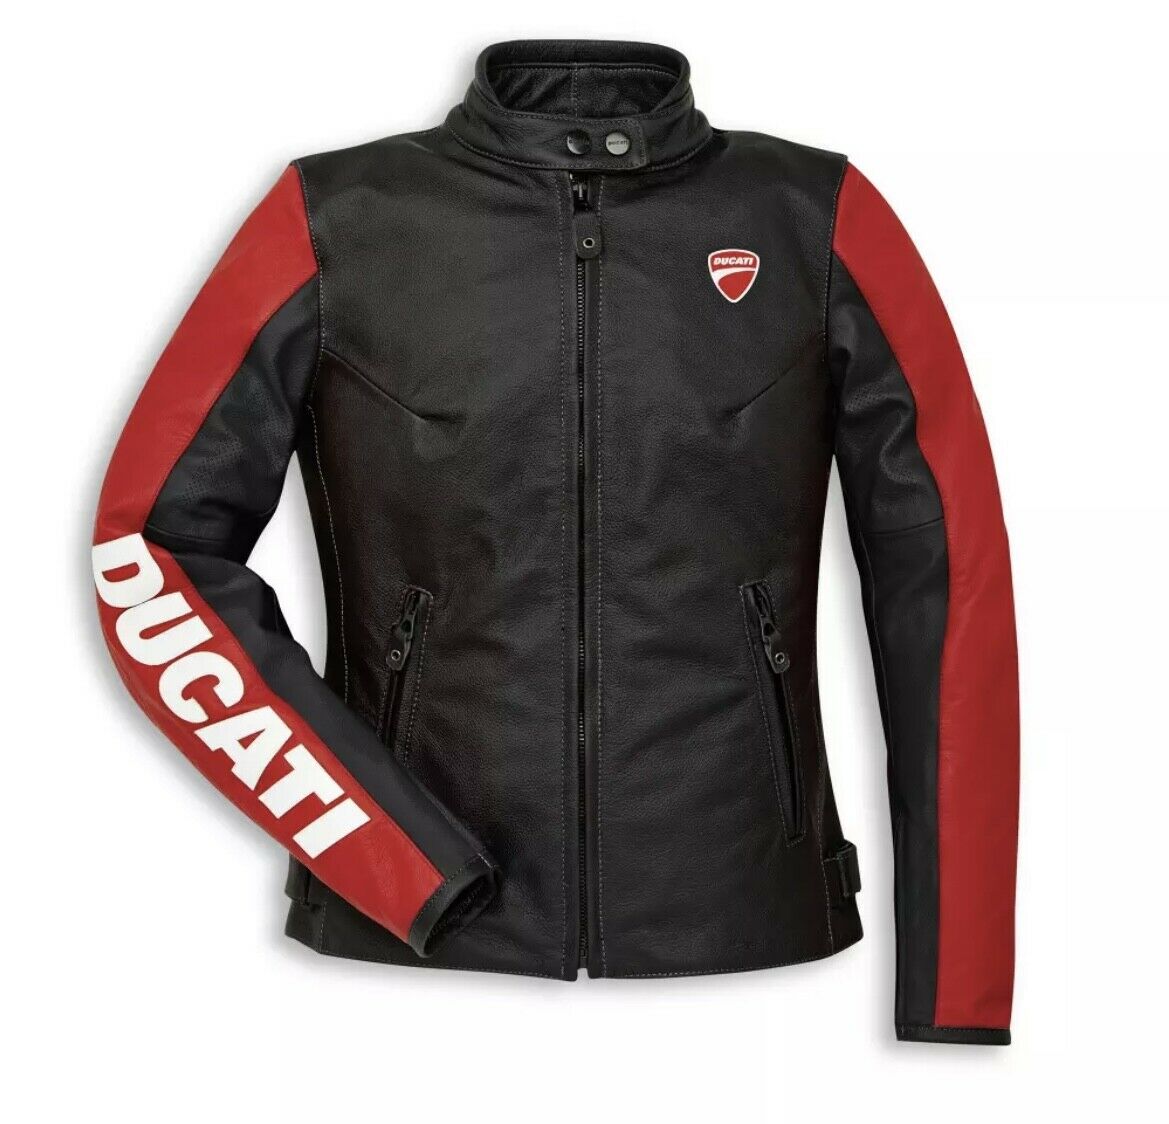 Ducati Corse Motorcycle Leather Racing Jacket | SPEEDYSTAR 3XL / Yes. Add to Order(+$20)